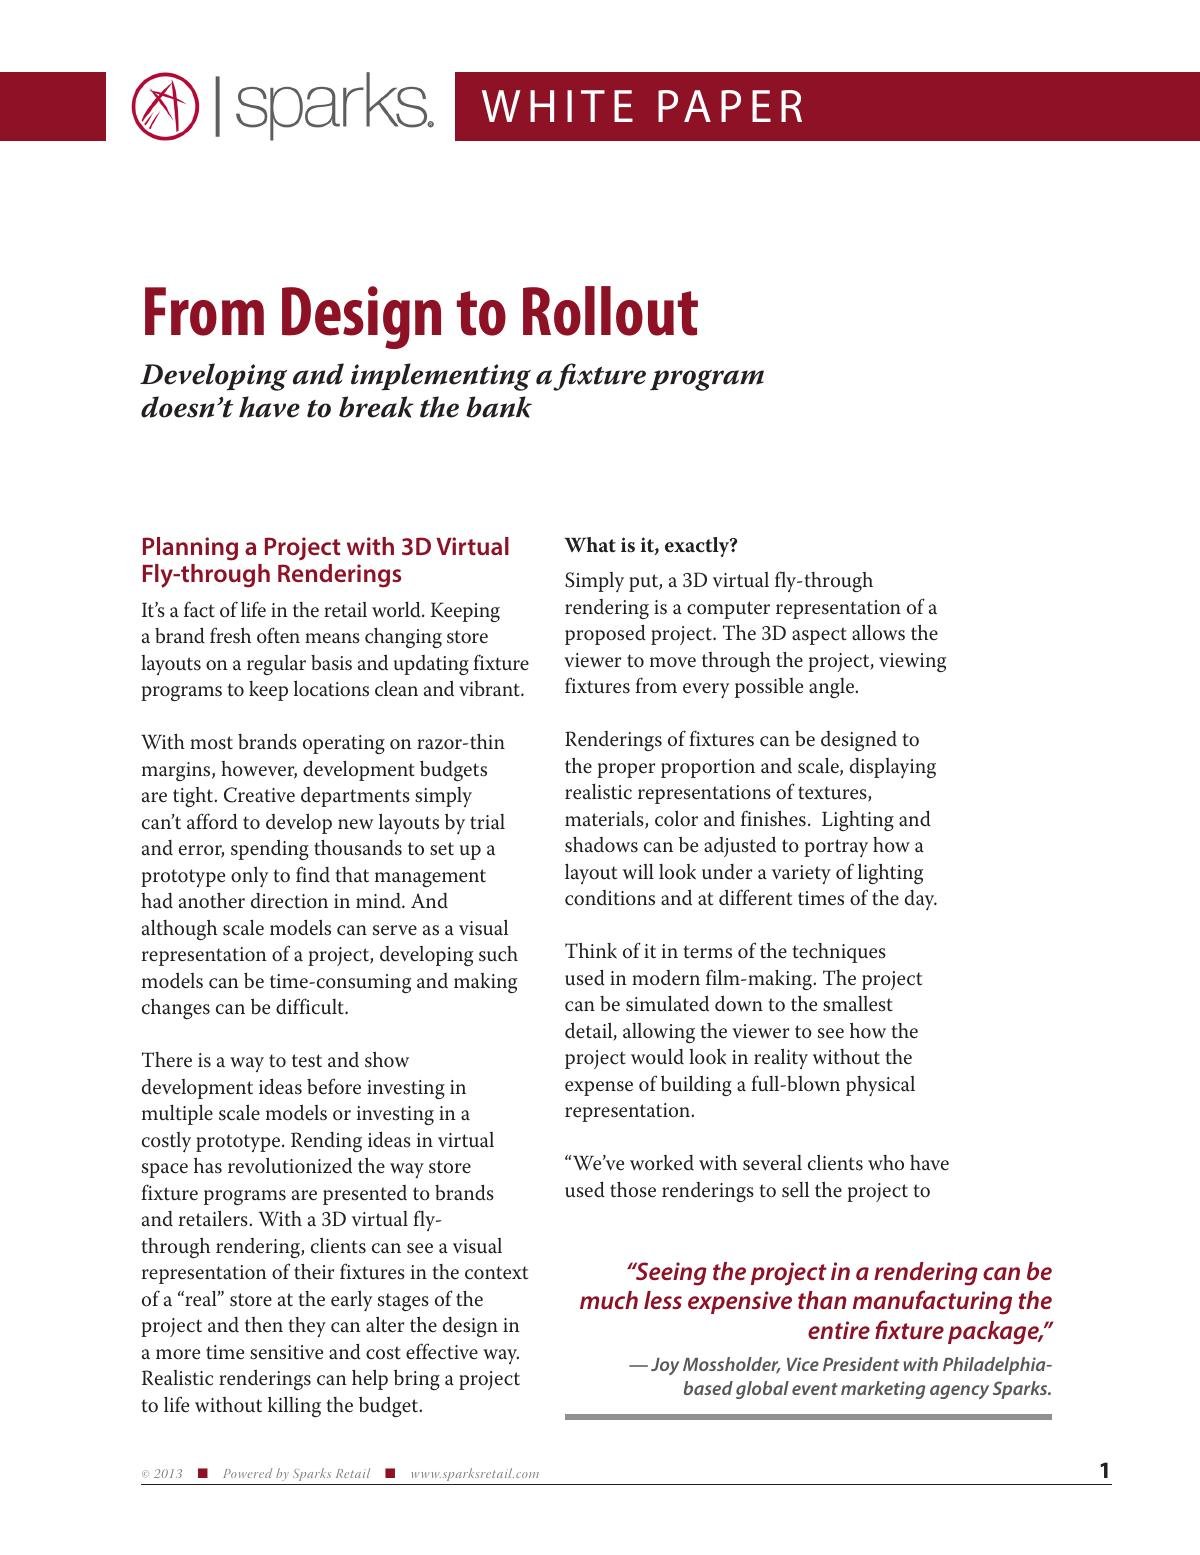 From Design to Rollout